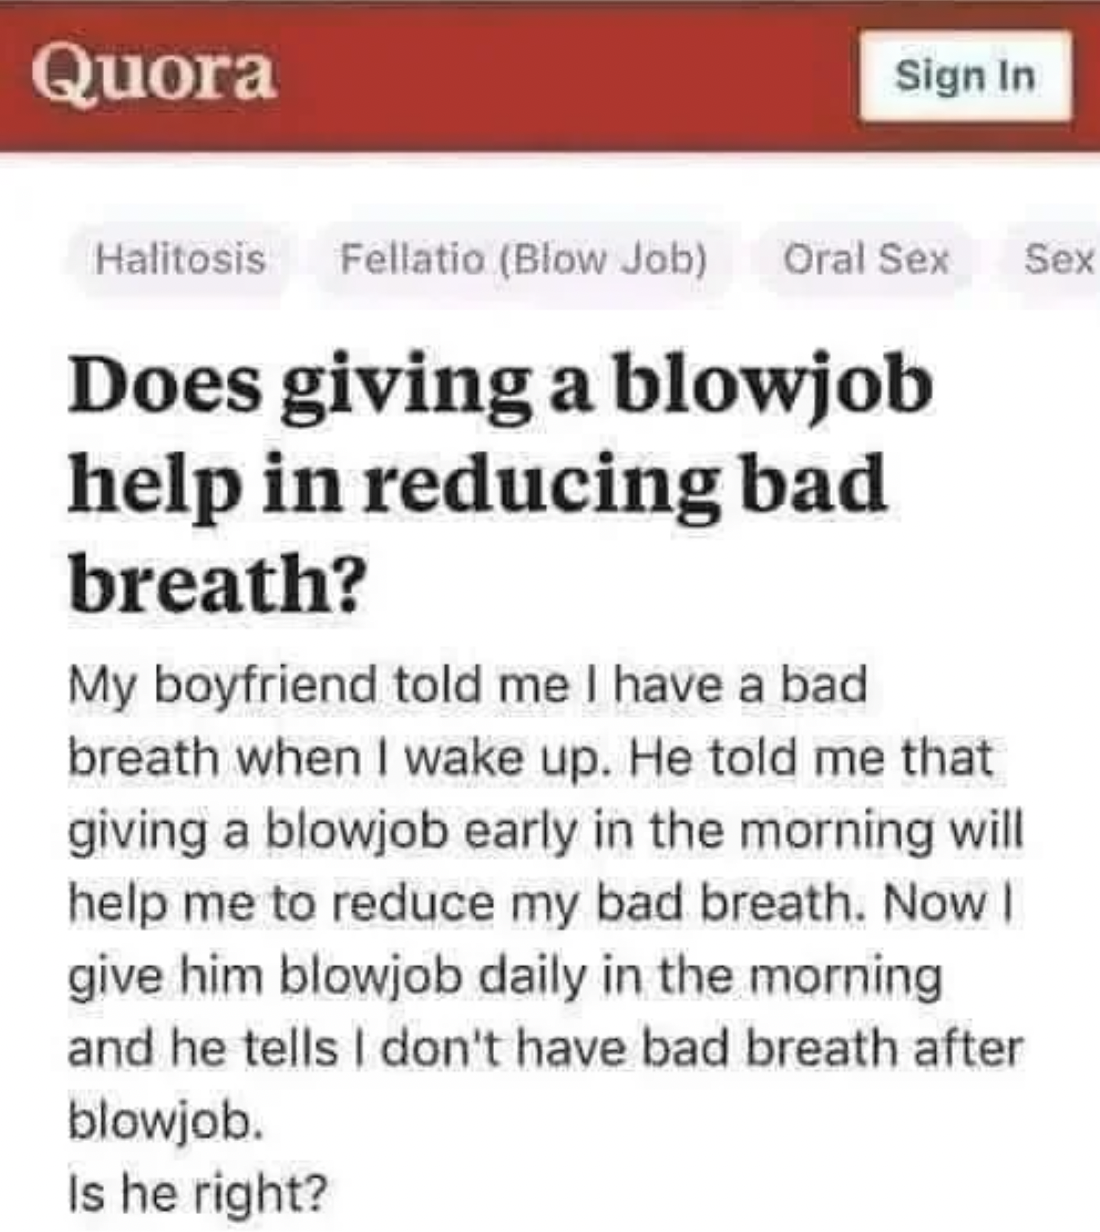 facepalms - Fellatio - Quora Sign In Halitosis Fellatio Blow Job Oral Sex Does giving a blowjob help in reducing bad breath? Sex My boyfriend told me I have a bad breath when I wake up. He told me that giving a blowjob early in the morning will help me to